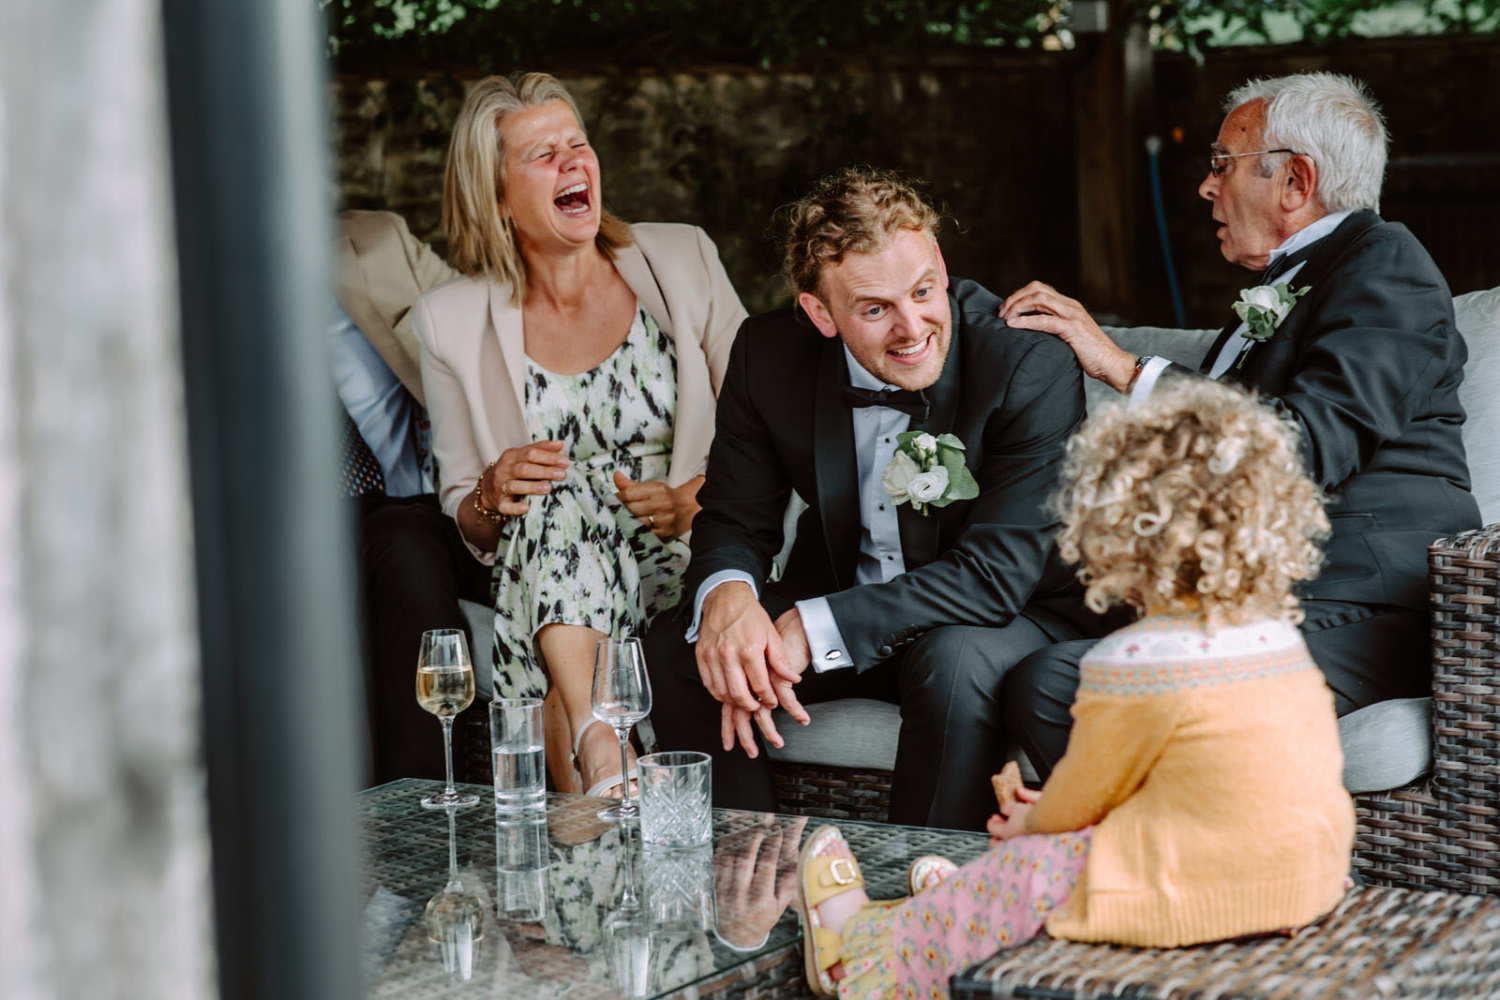 A group of people laughing at a wedding.